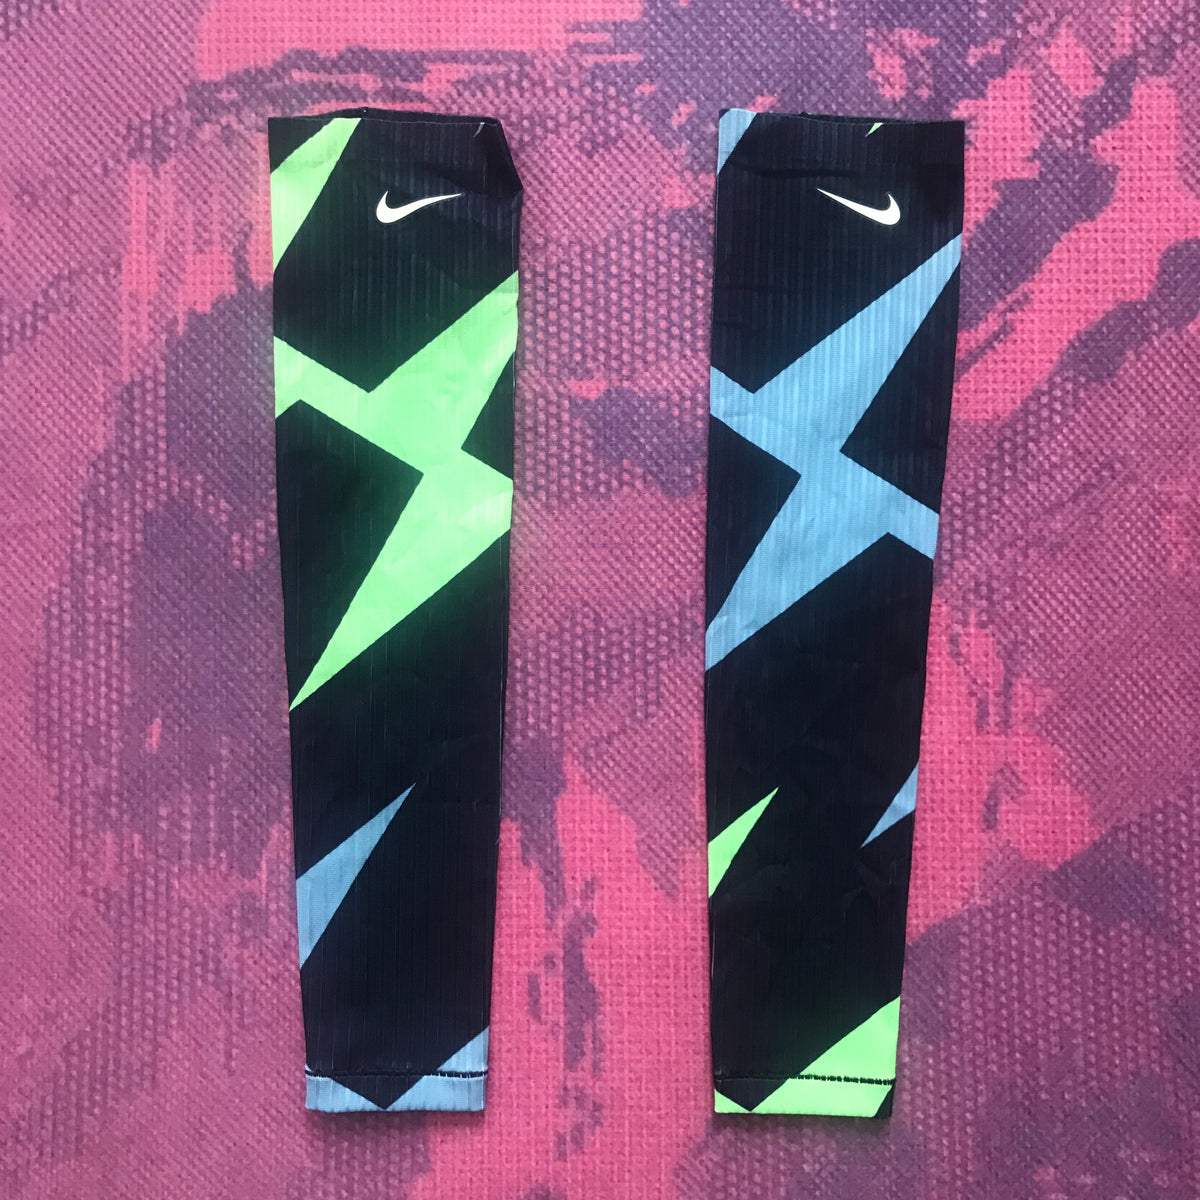 2020/21 Nike Pro Elite Arm Sleeves (L) – Bell Lap Track and Field